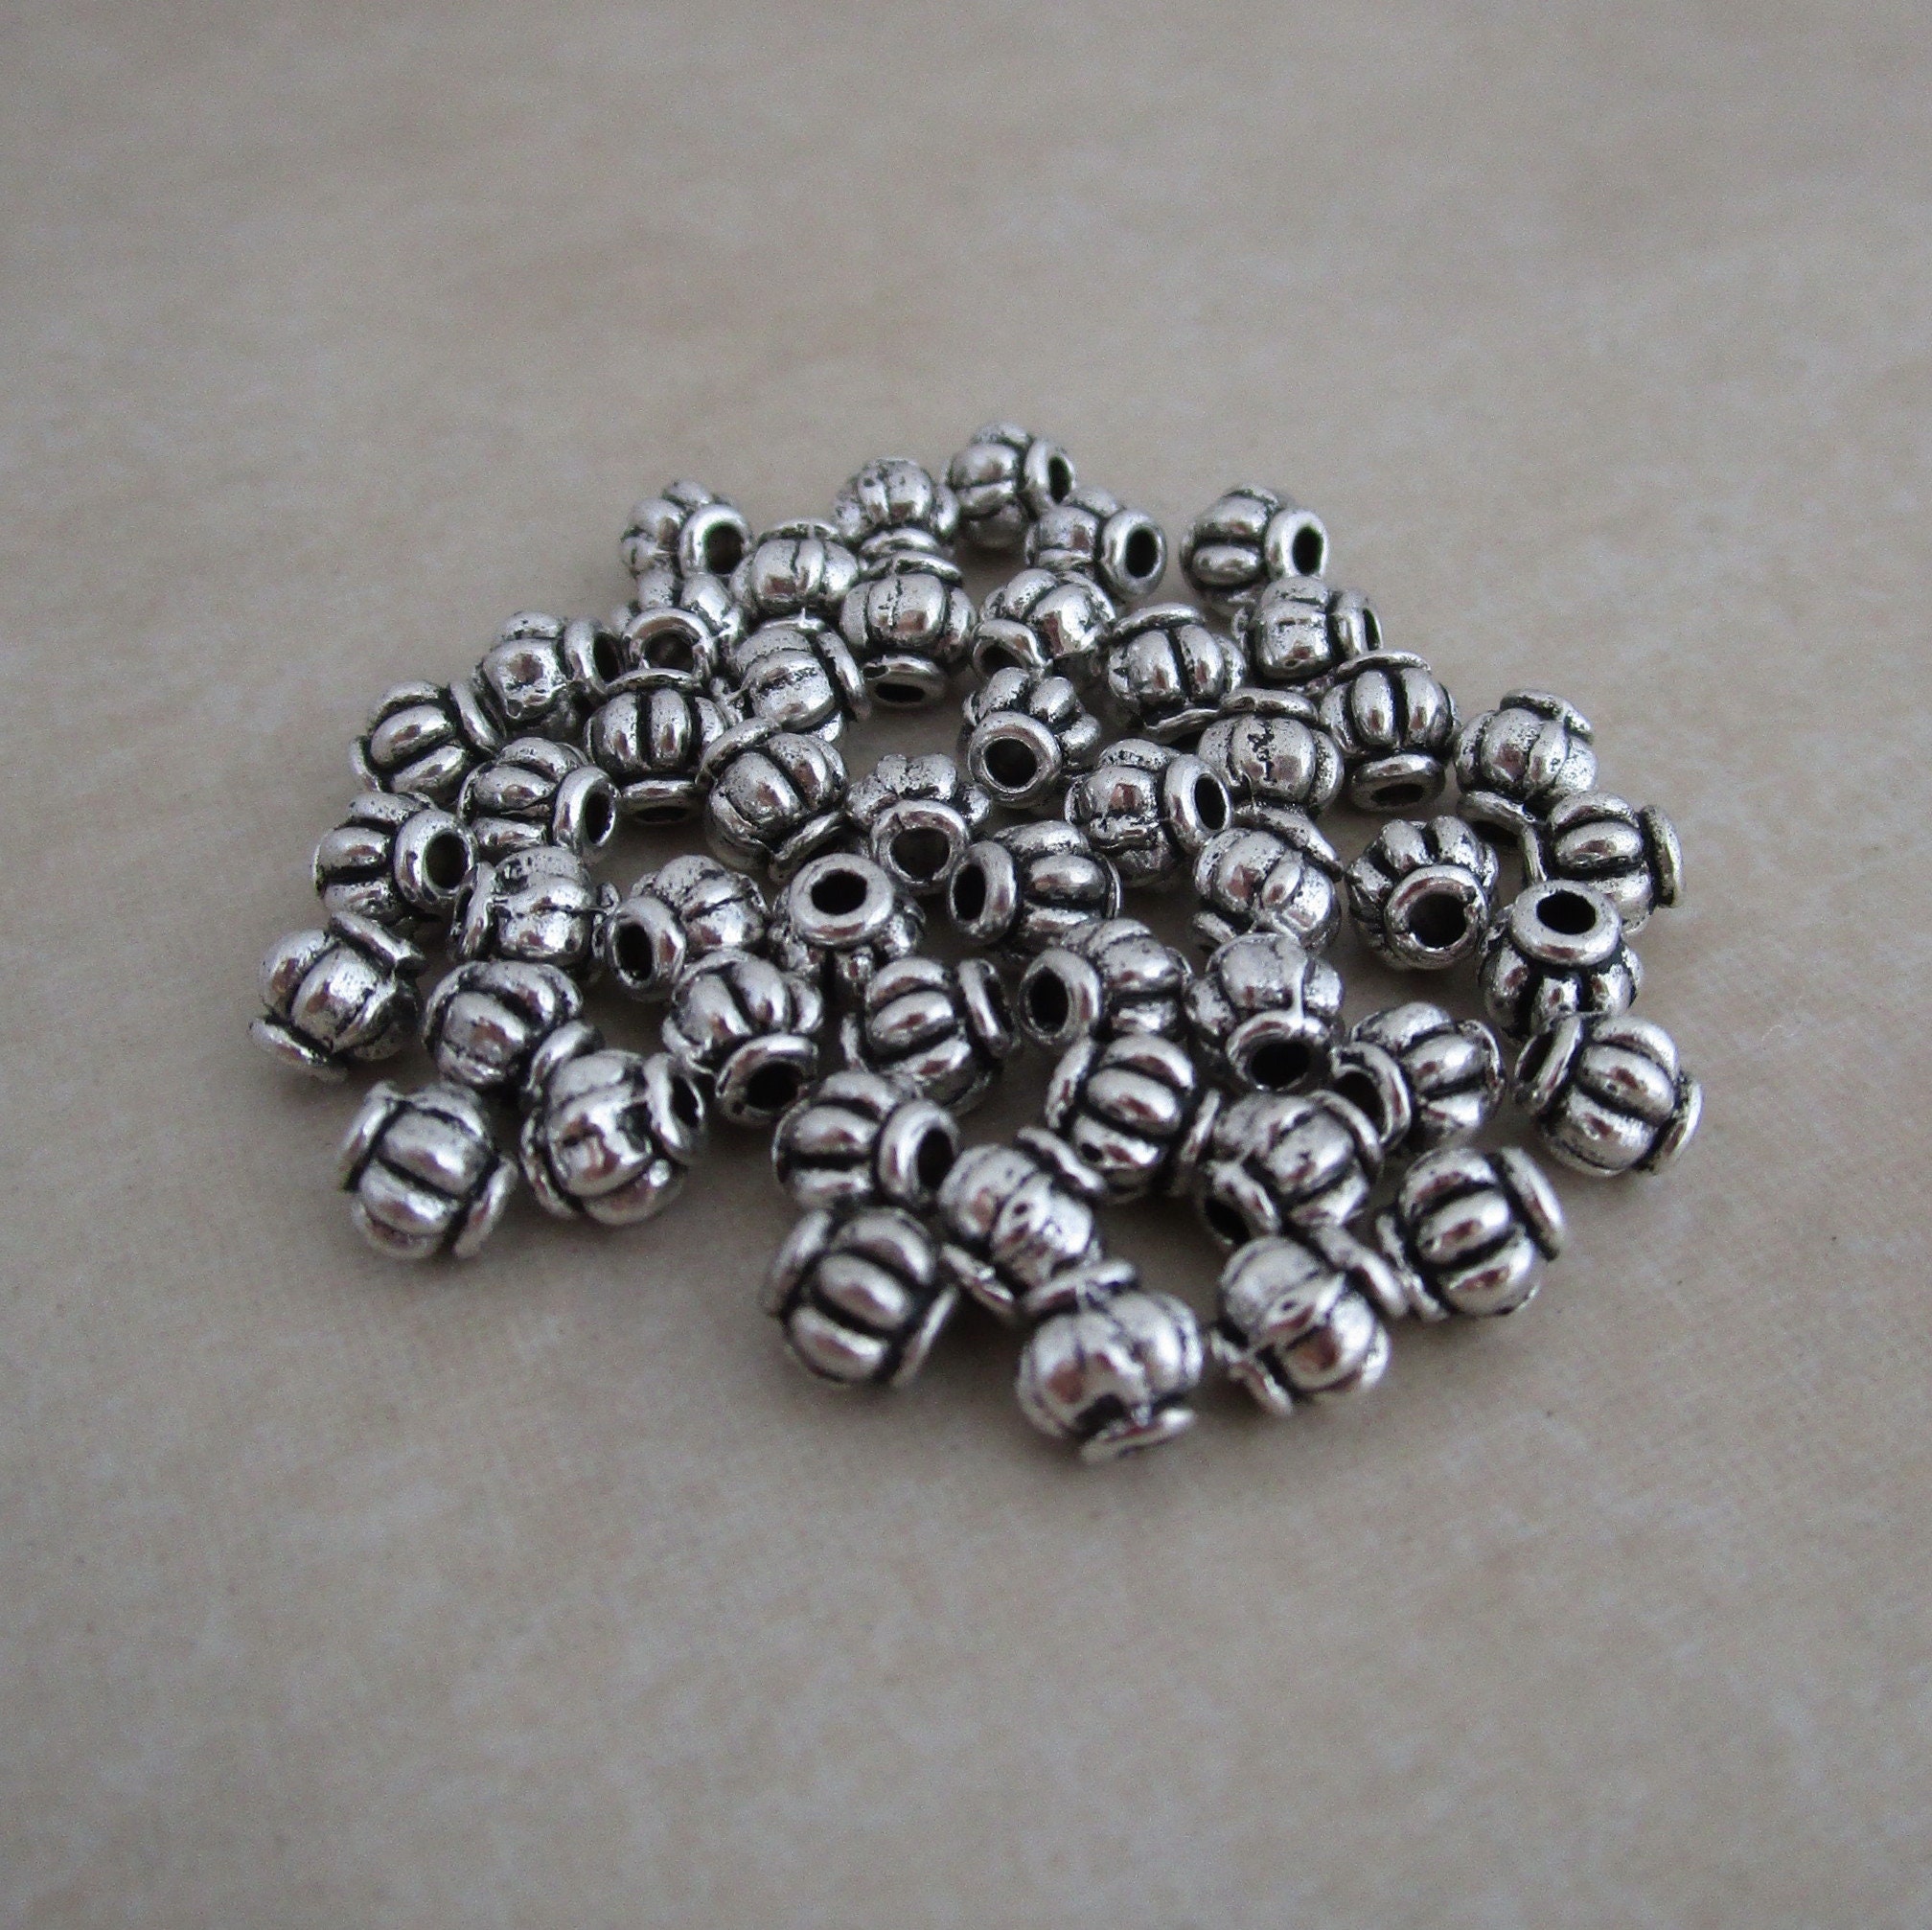 7.5mm Tibetan Silver Ball Beads, Ball Metal Spacers, Silver Color, 2.5mm  Hole, Fancy Round Beads, Jewelry Making Supply, Shiny Metal Ball